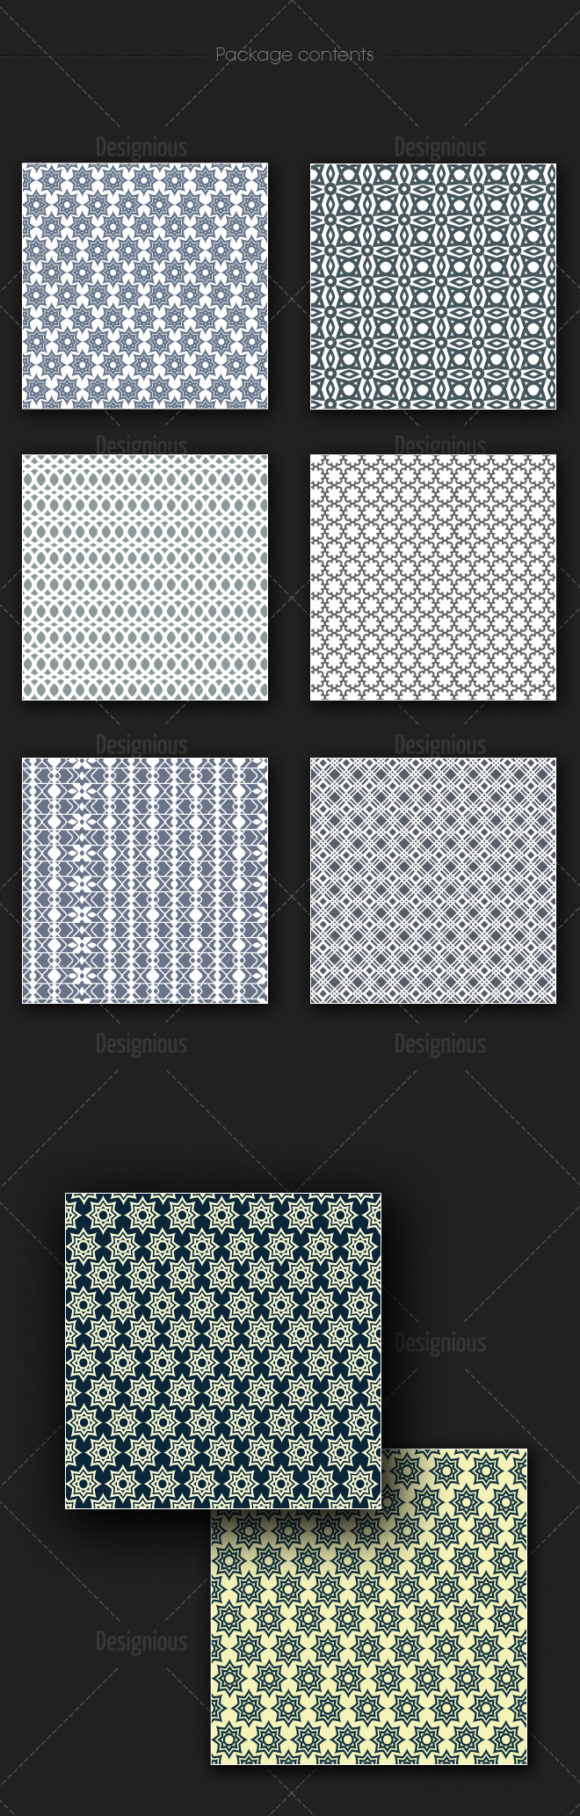 Seamless Patterns Vector Pack 169 2